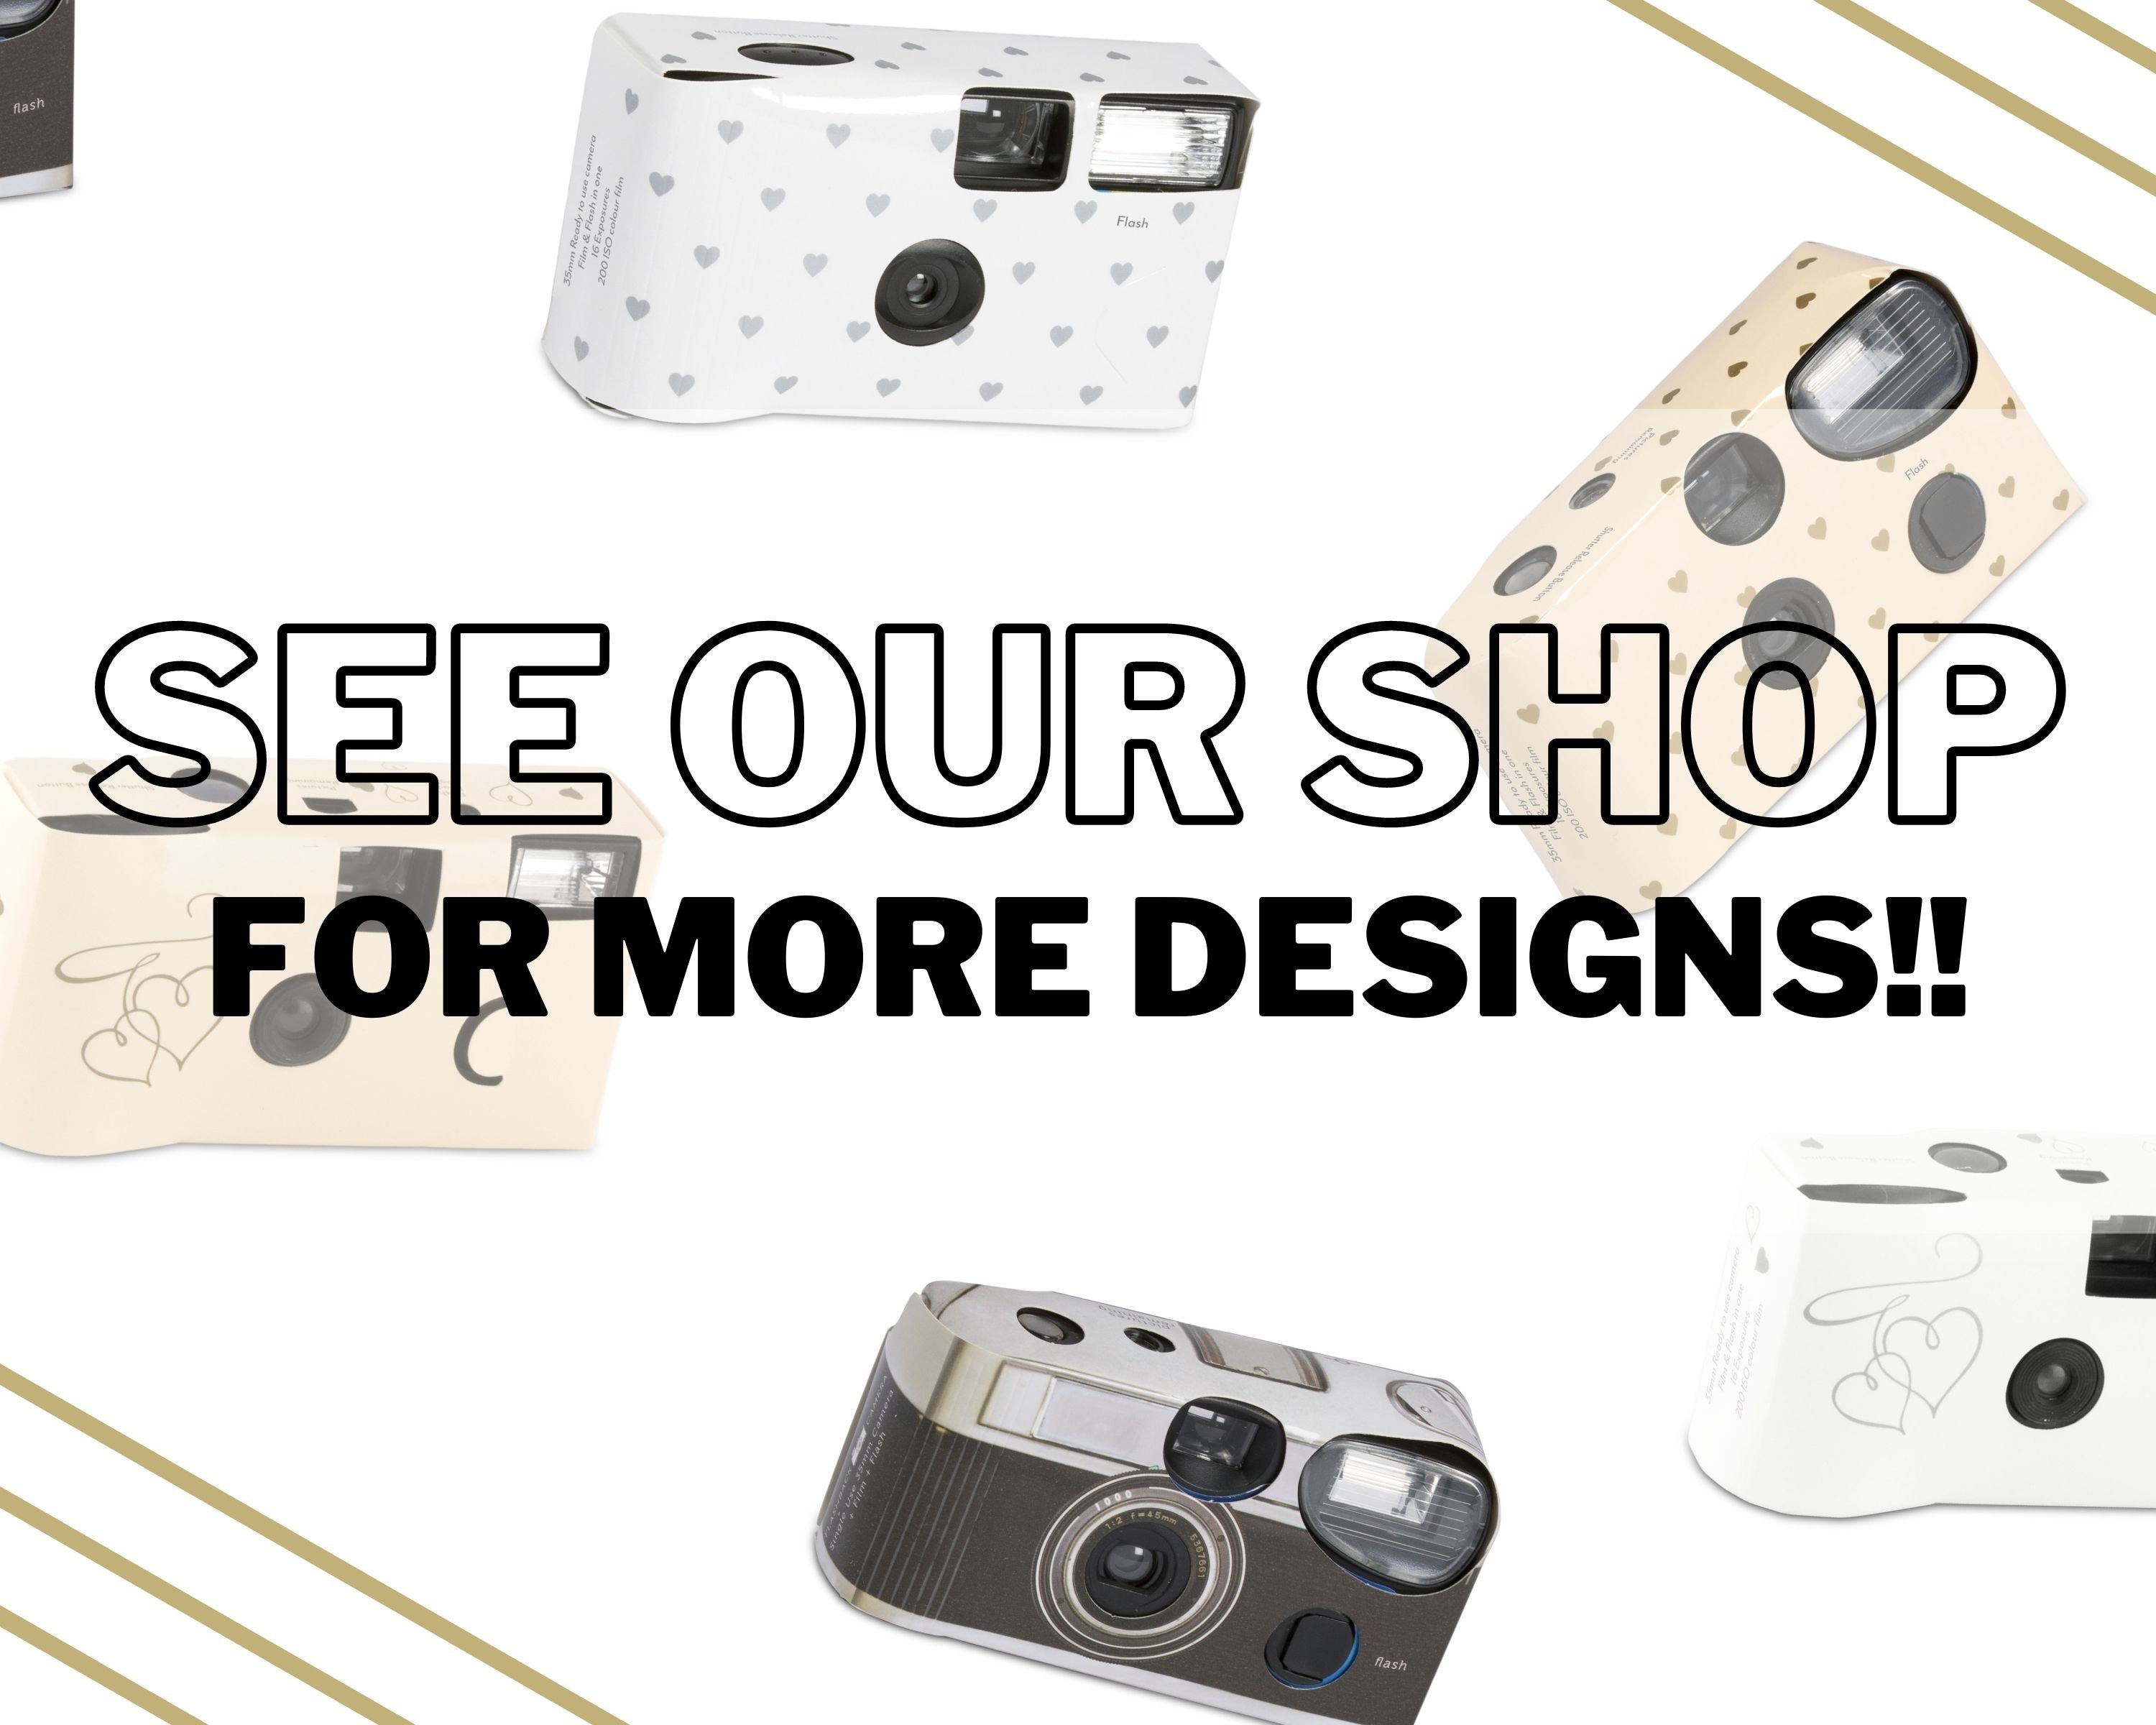 Fujifilm UO Exclusive Instax Mini 12 Instant Camera  Urban Outfitters  Mexico - Clothing, Music, Home & Accessories